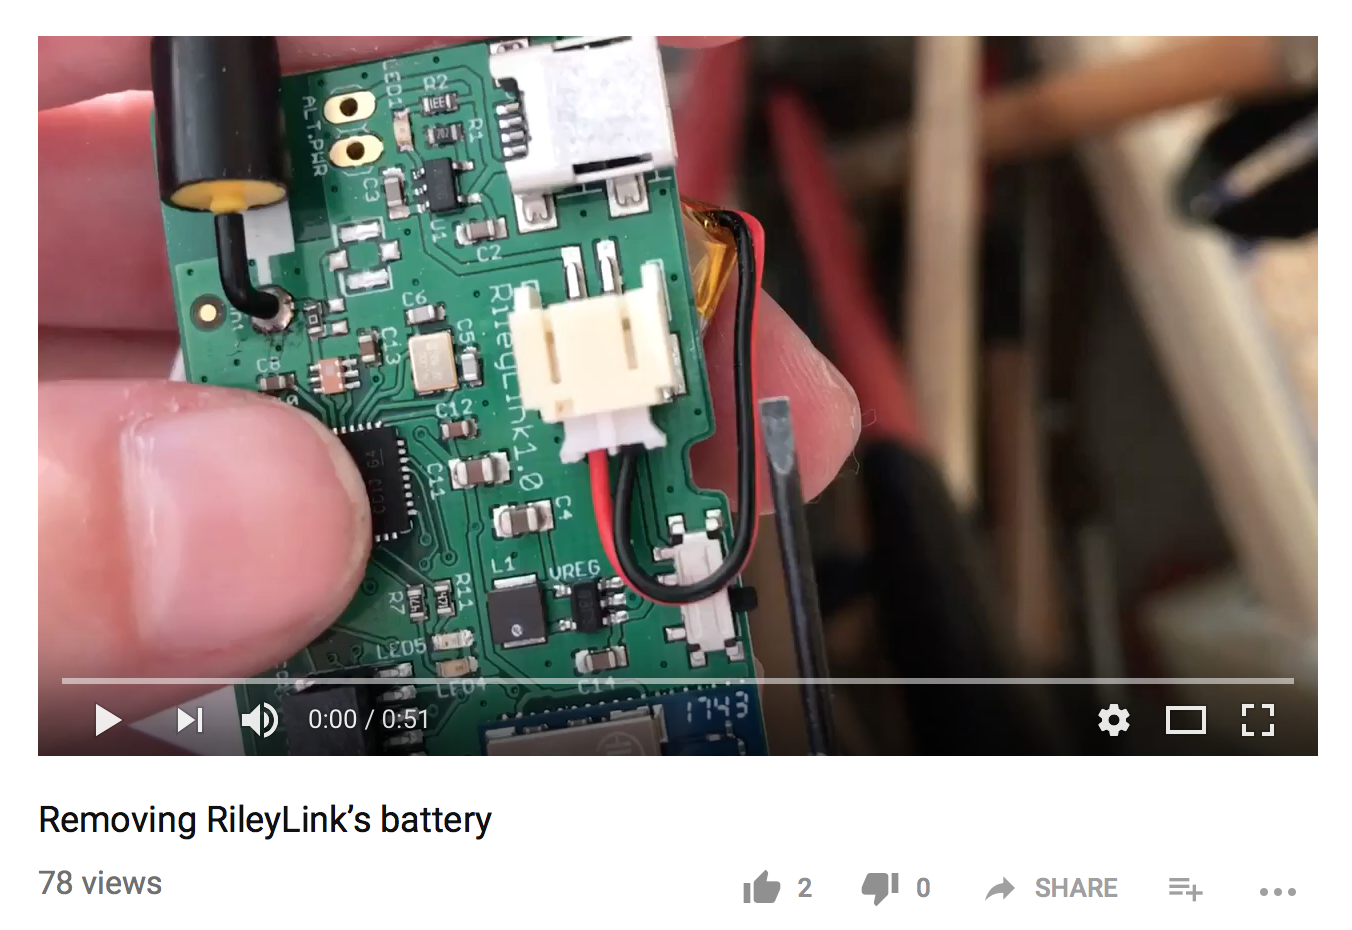 frame from video showing how to remove battery from RileyLink, follow link for video